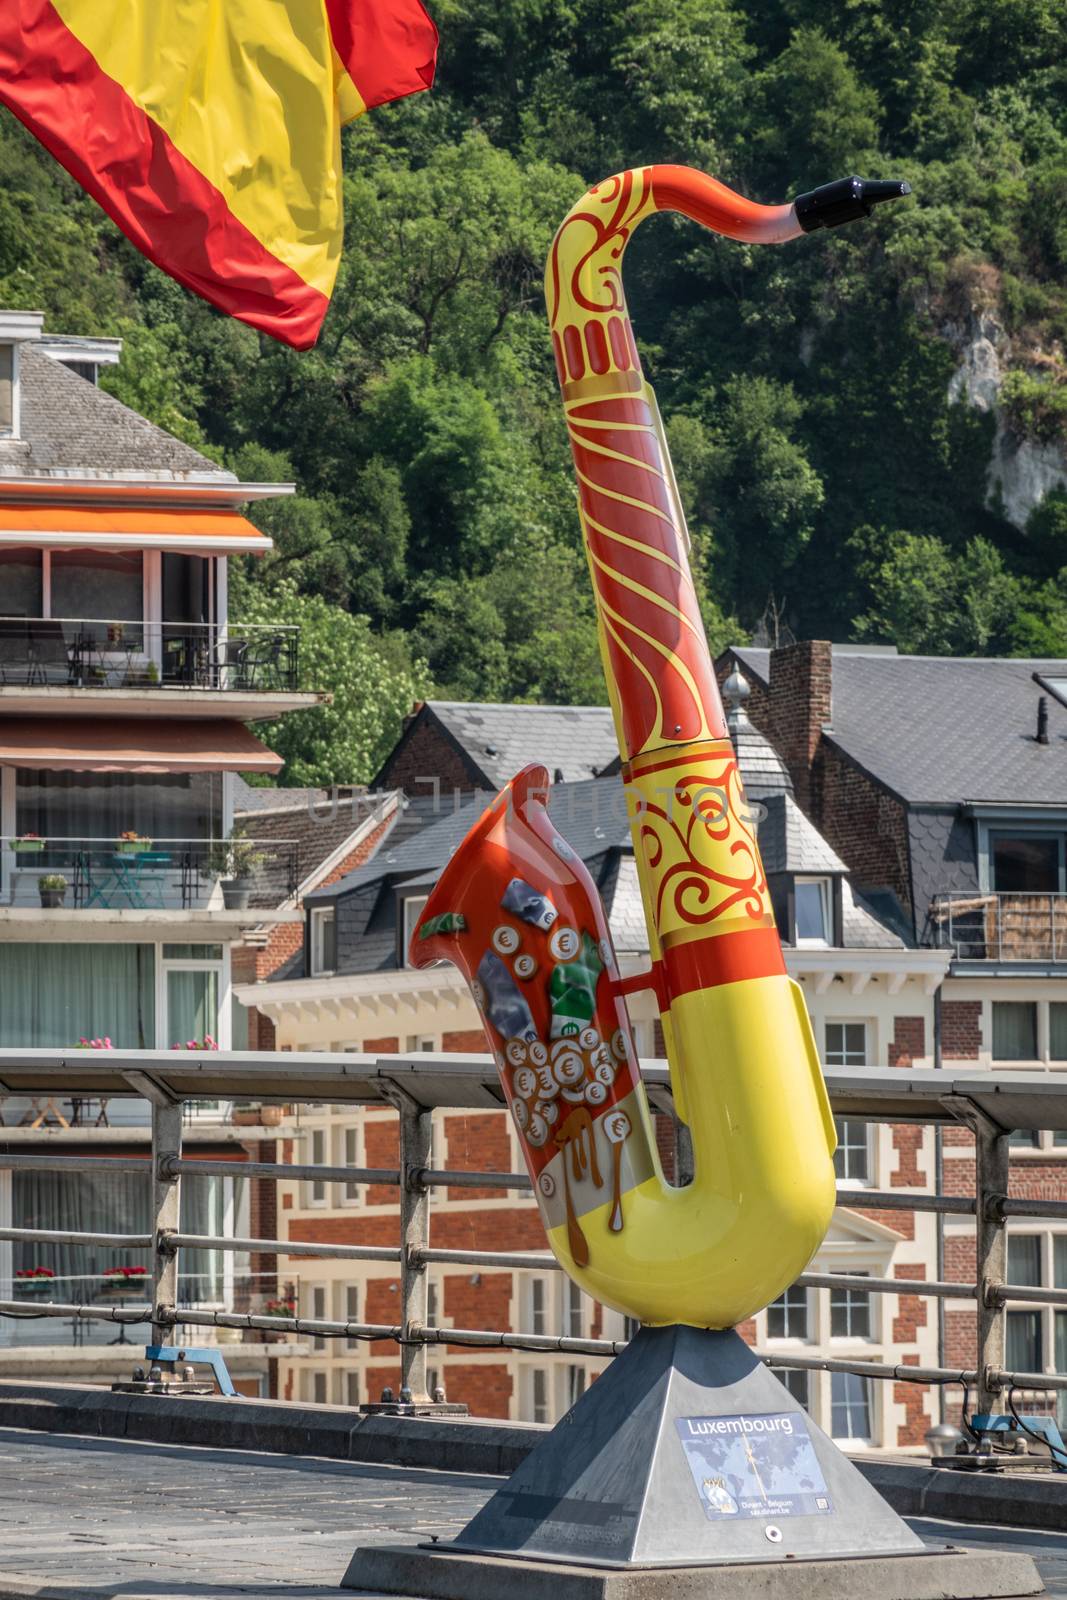 Saxophone statue to honor Luxemburg in Dinant, Belgium. by Claudine